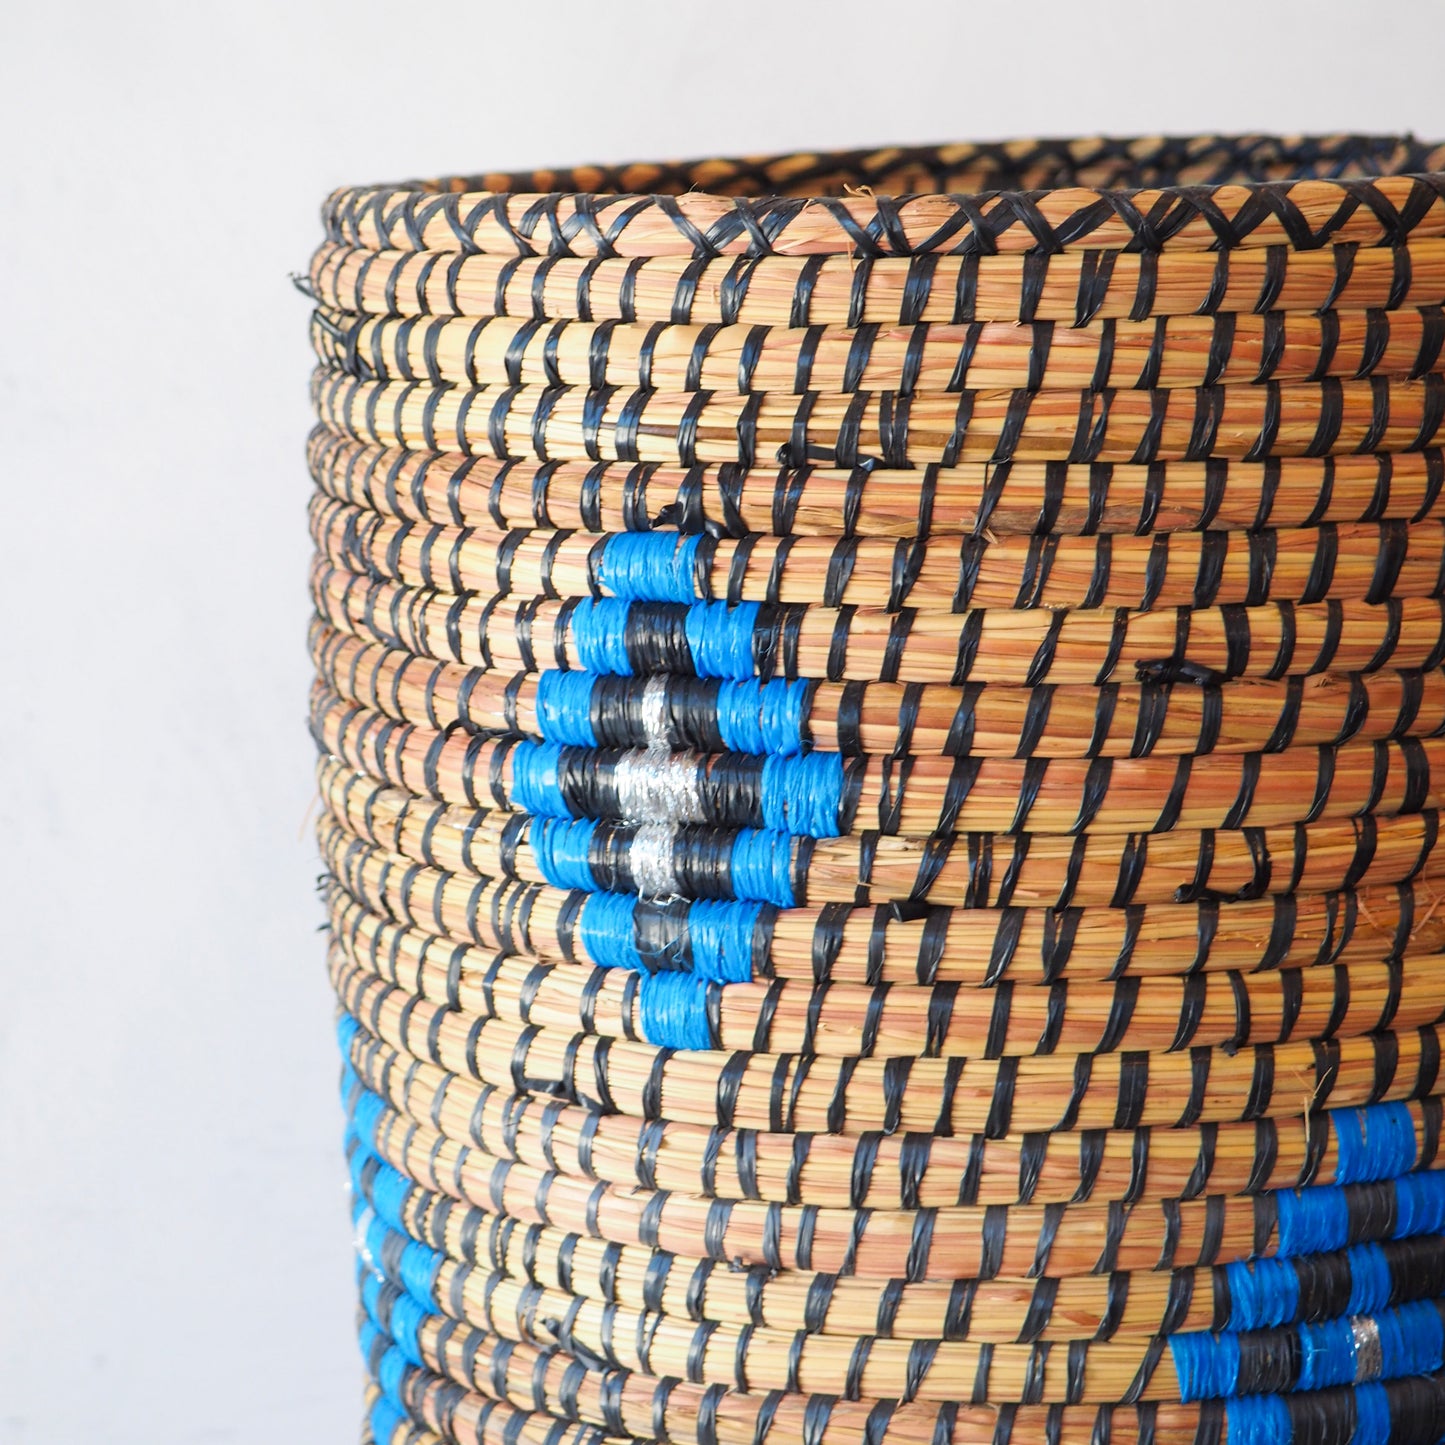 Moroccan Woven Basket w/Blue Accents